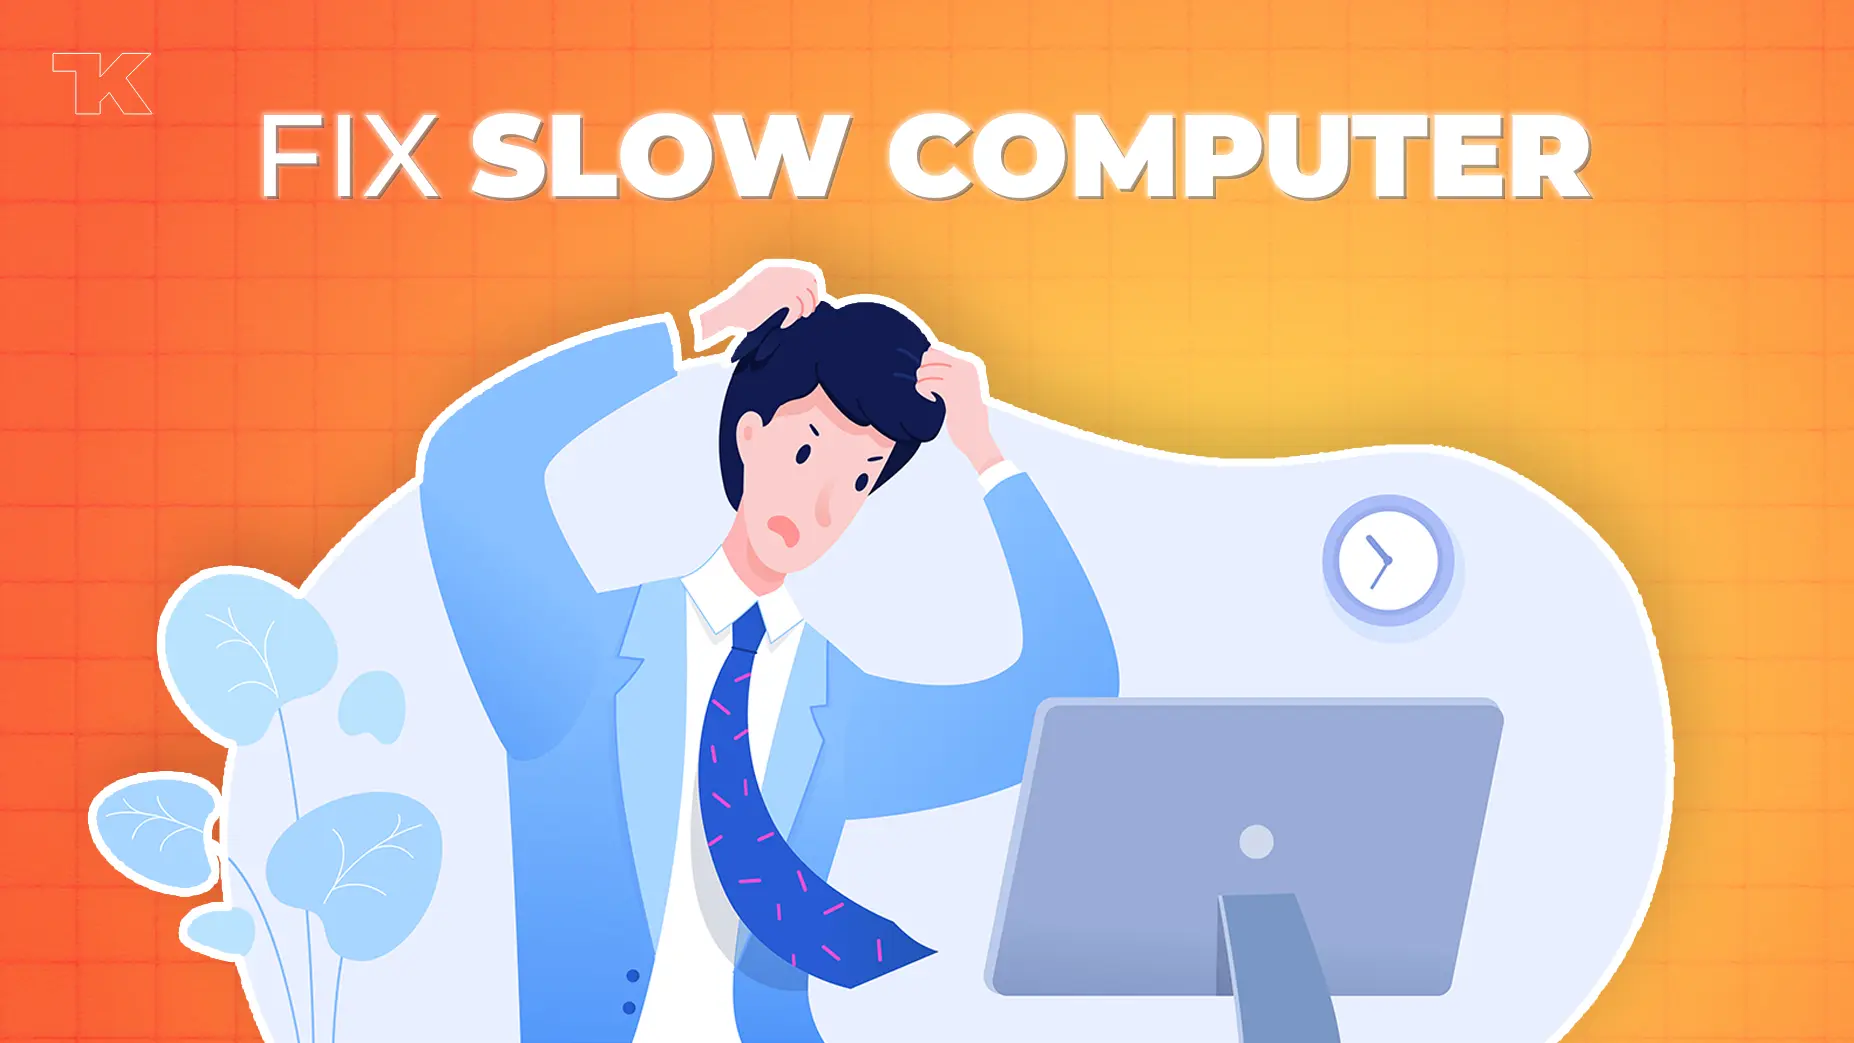 The Complete Guide to Make Your Computer Fast: Fix Slow Computer (13 ways)